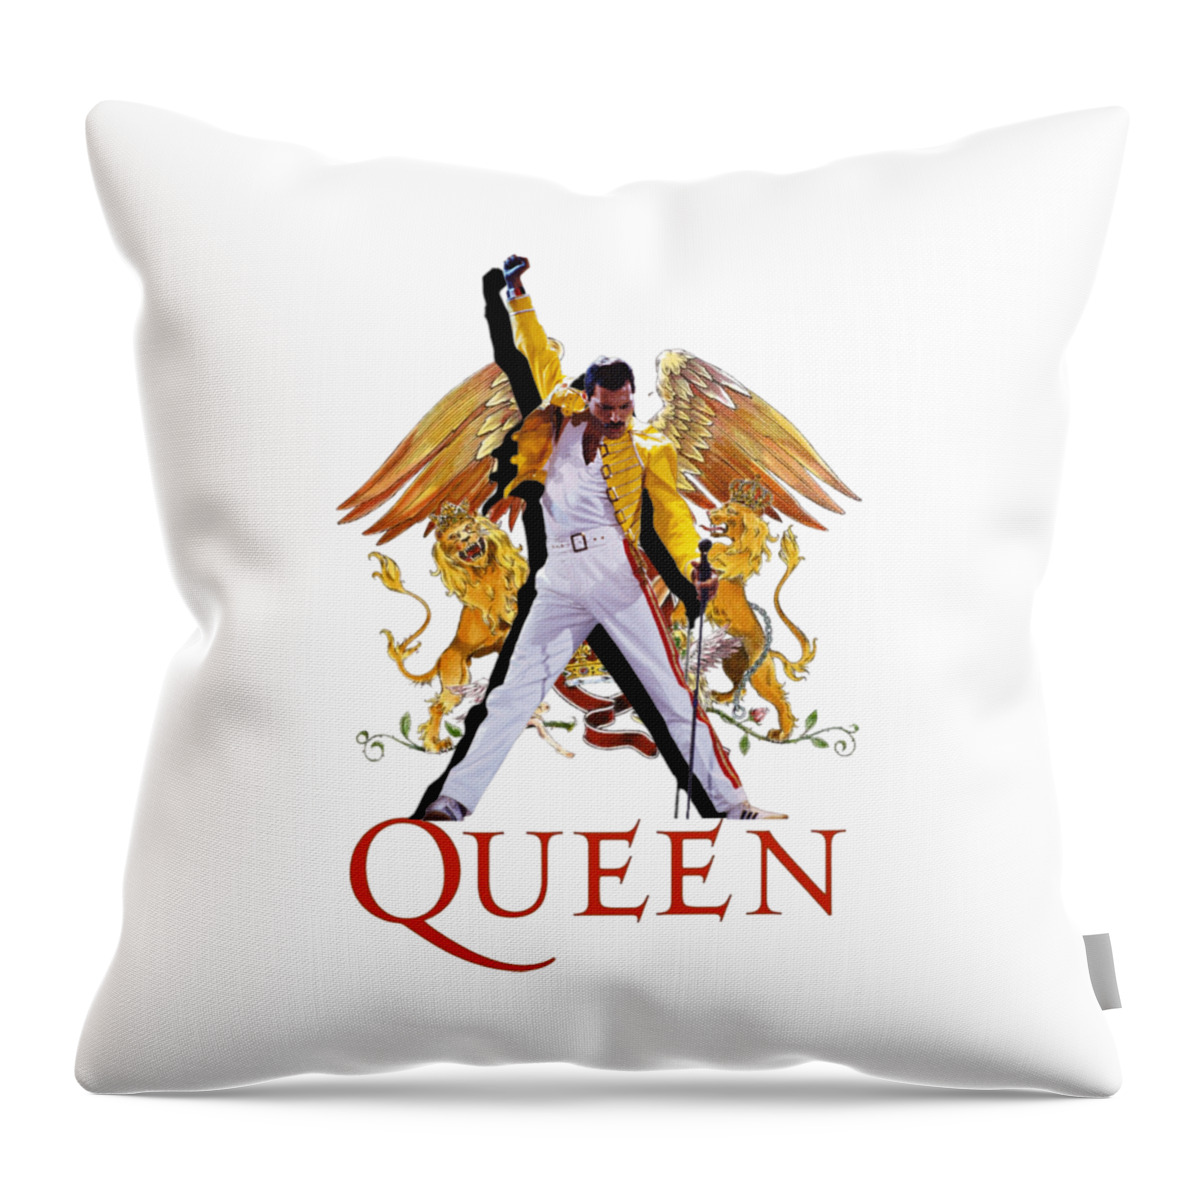 Freddie Throw Pillow featuring the mixed media Freddie Mercury Queen Logo by Sally Ayad